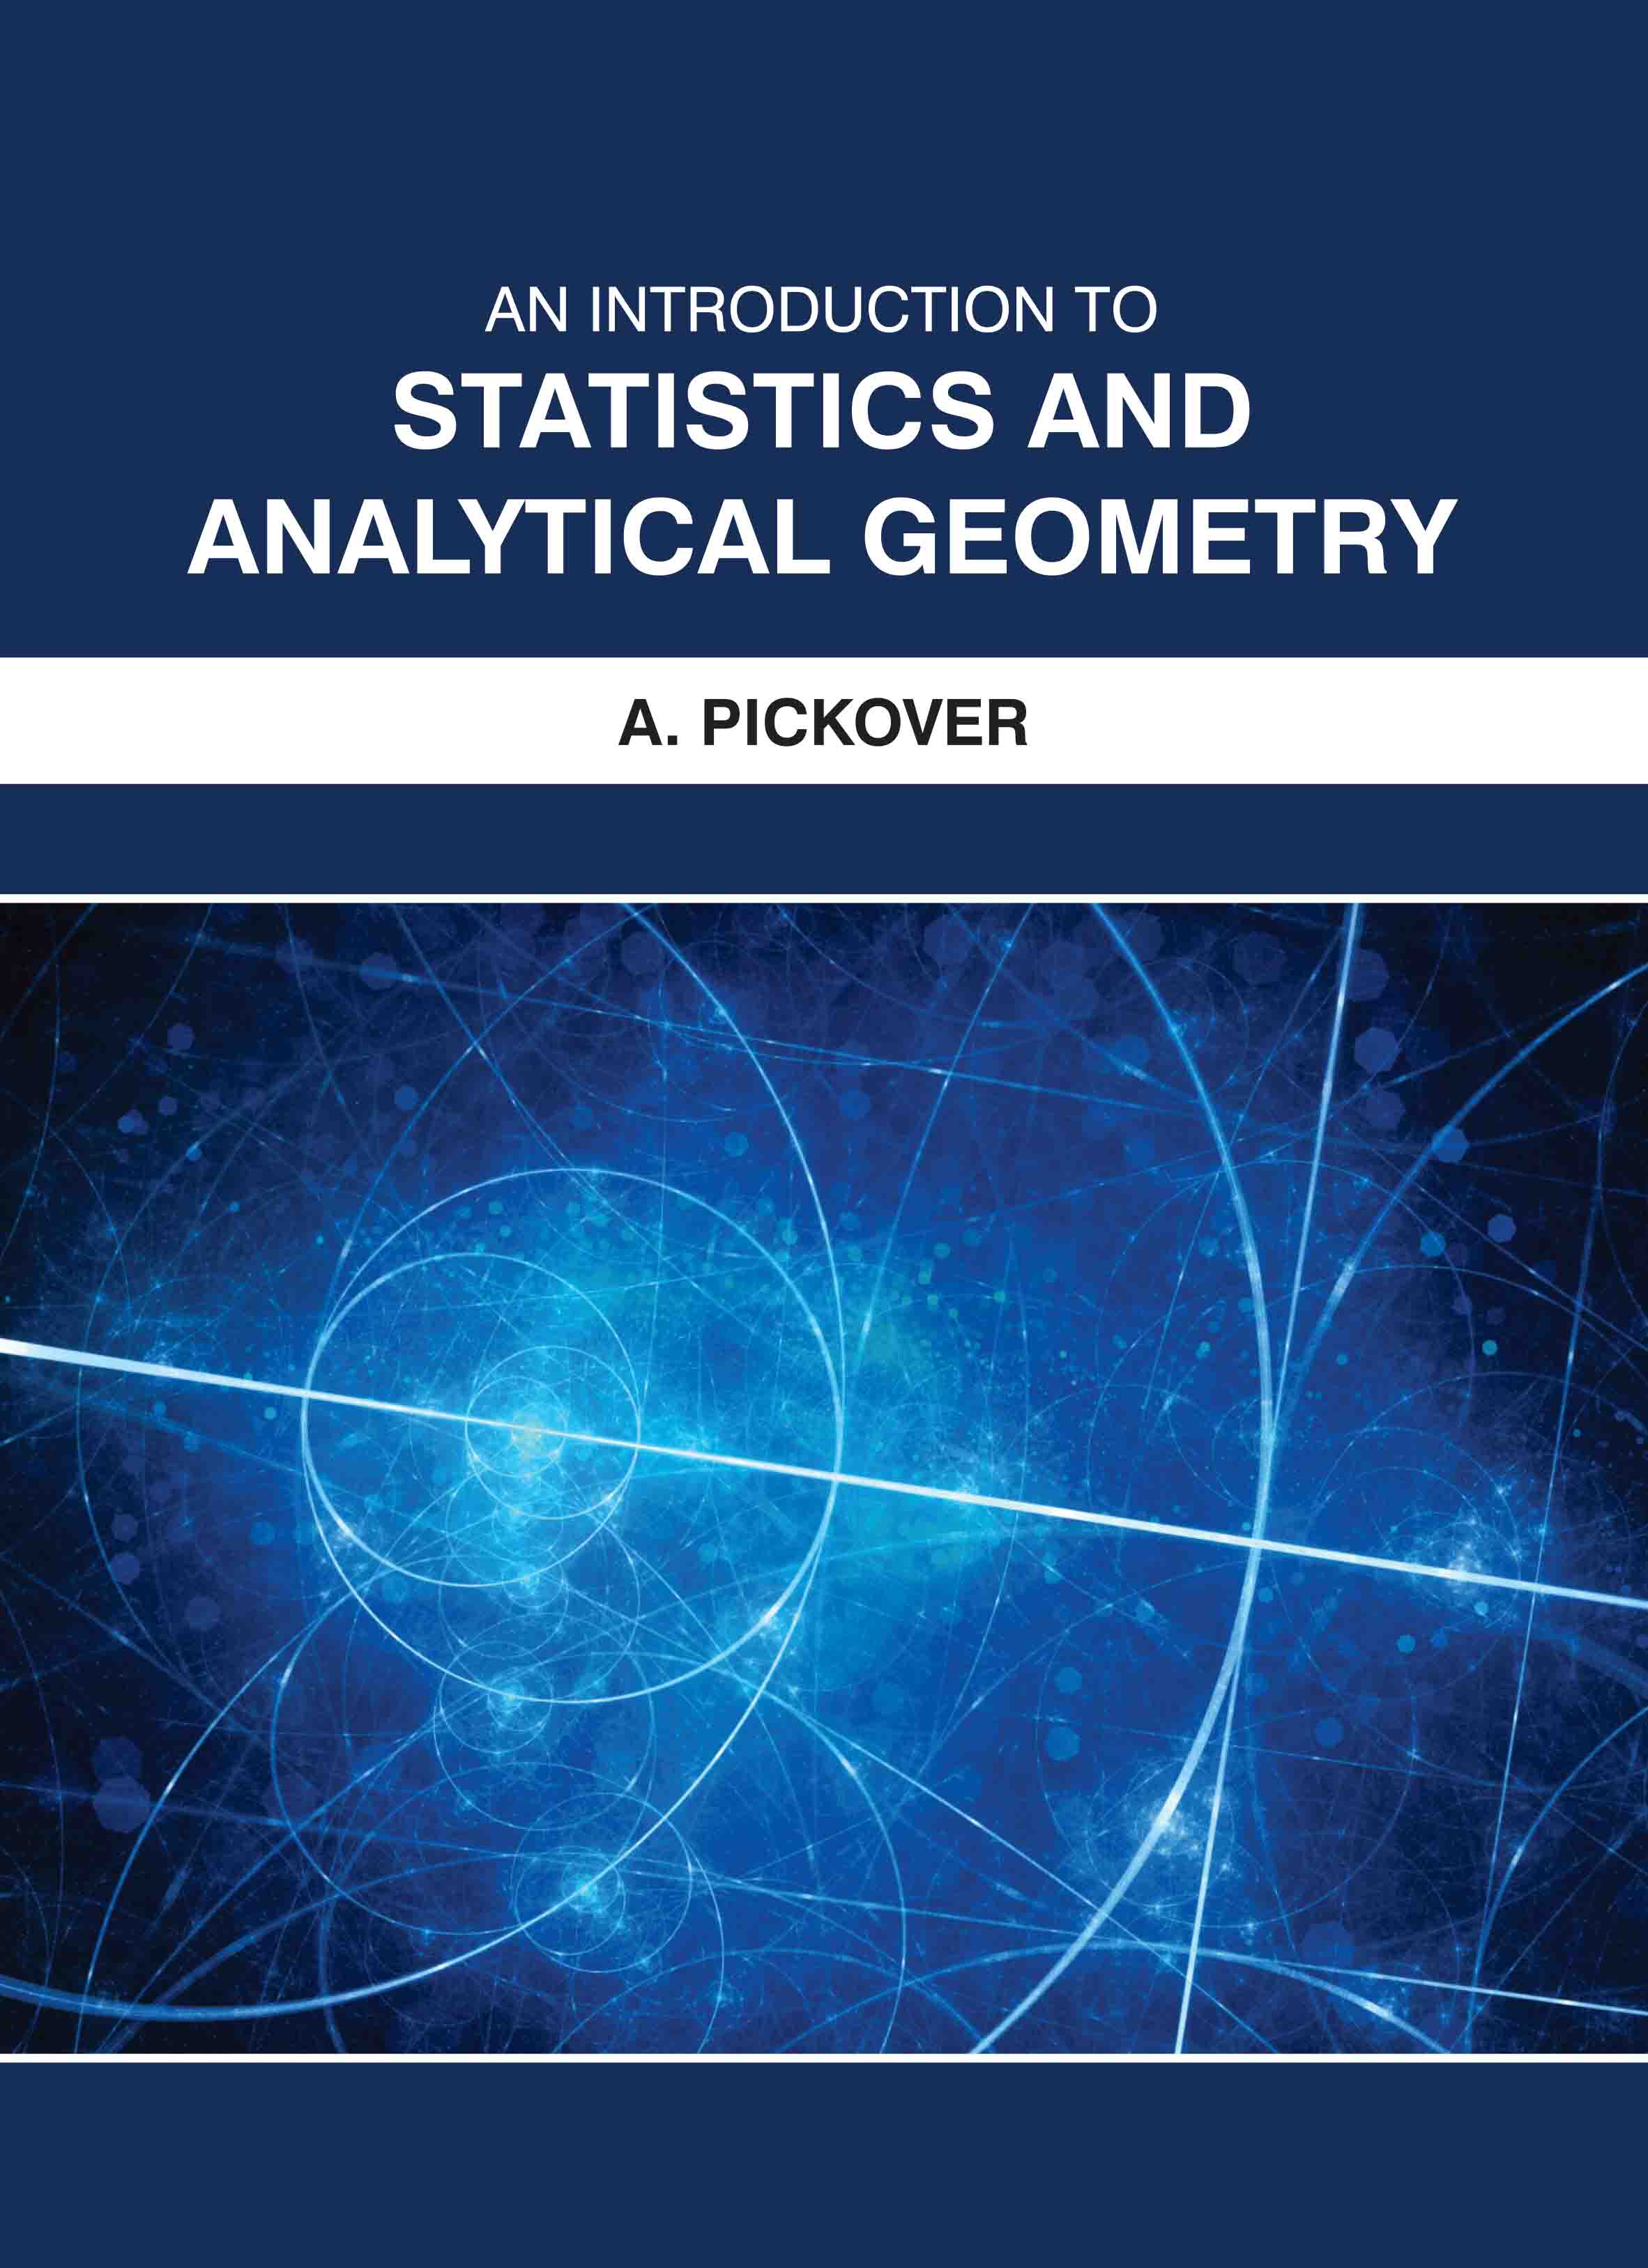 An Introduction to Statistics and Analytical Geometry